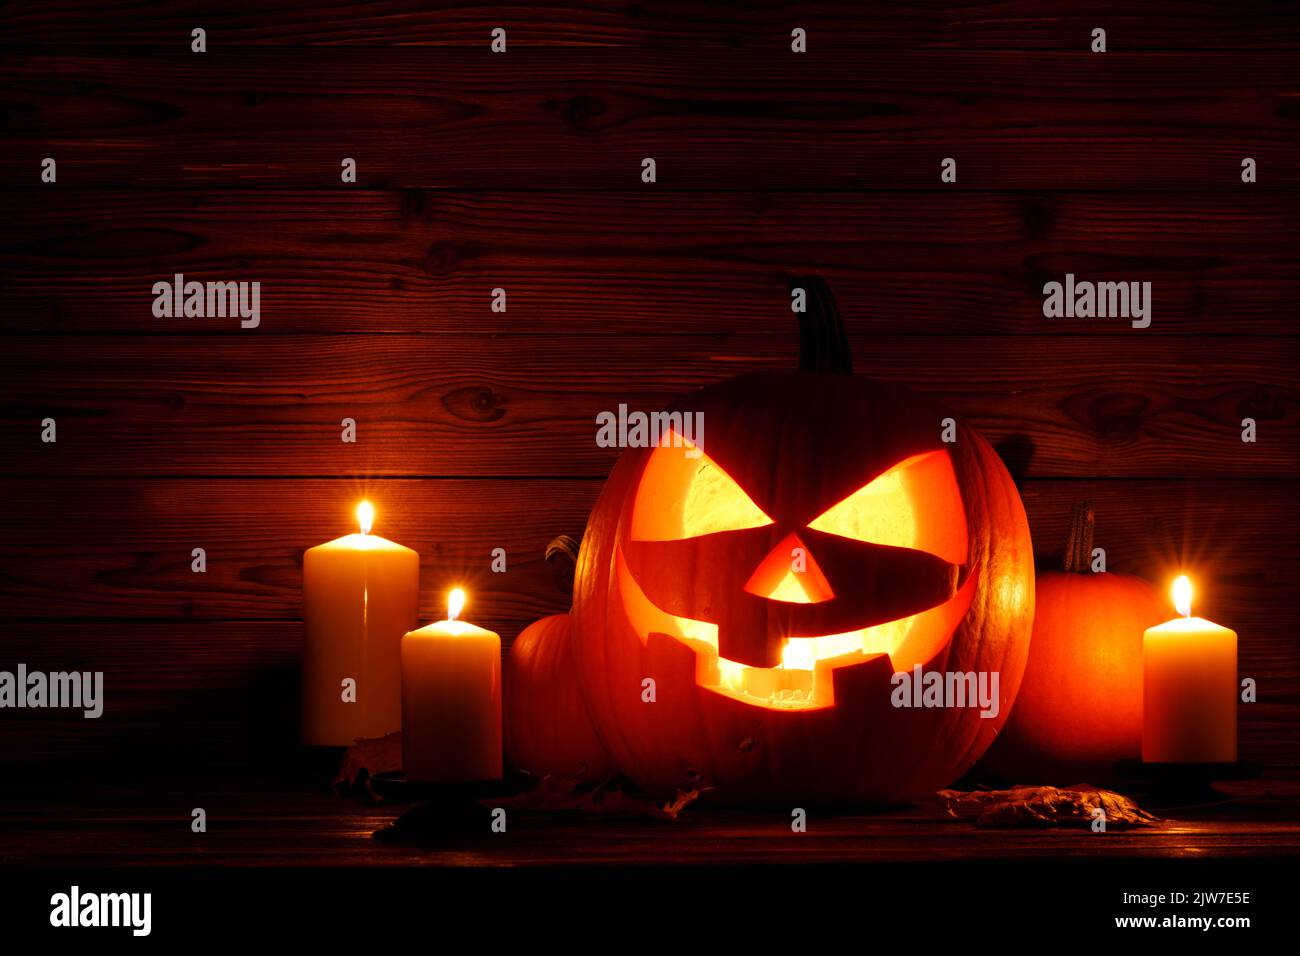 Halloween night glowing pumpkins and candles on wooden background Stock Photo